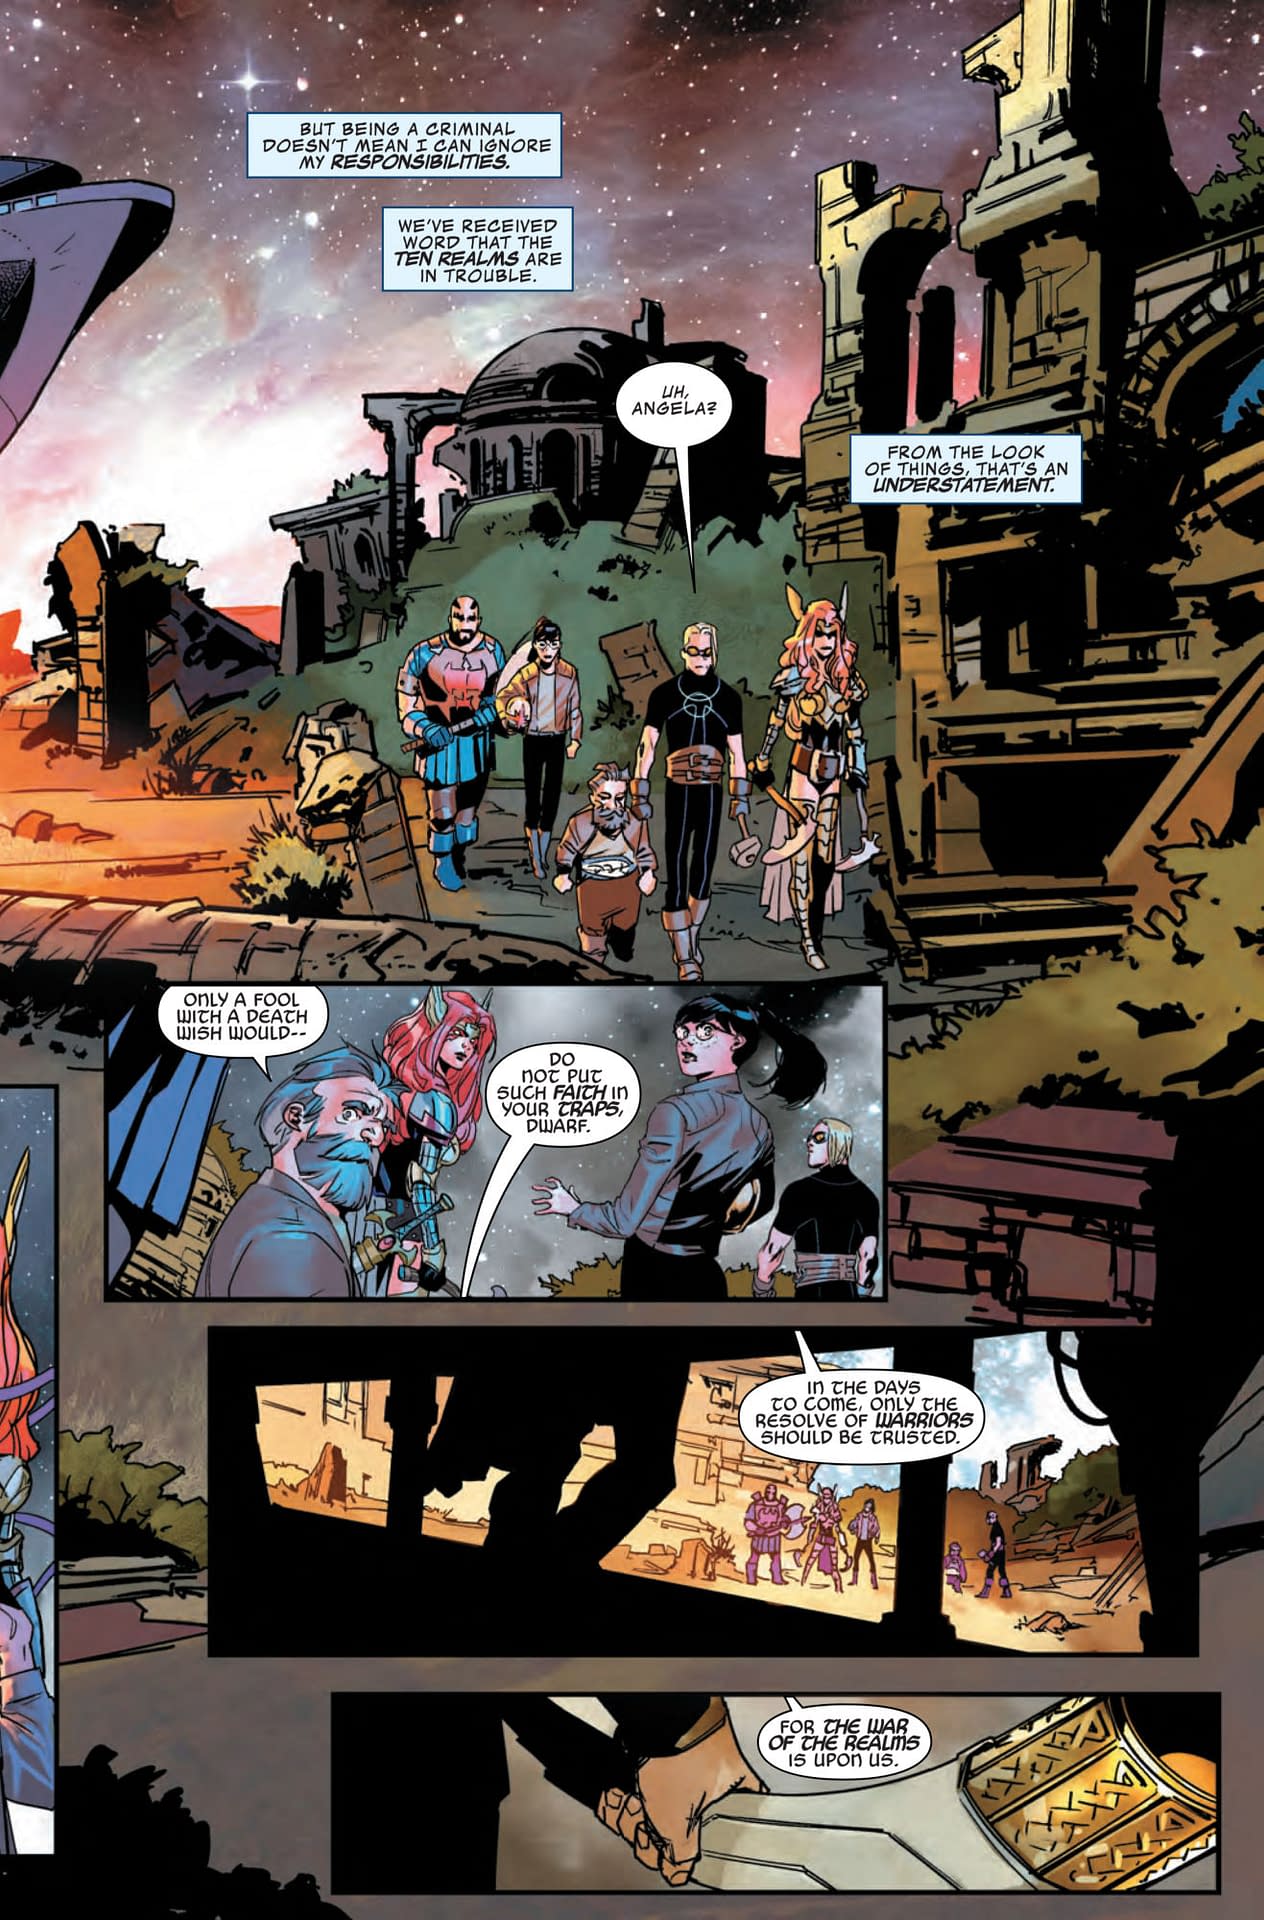 All of That for Nothing? Asgardians of the Galaxy #8